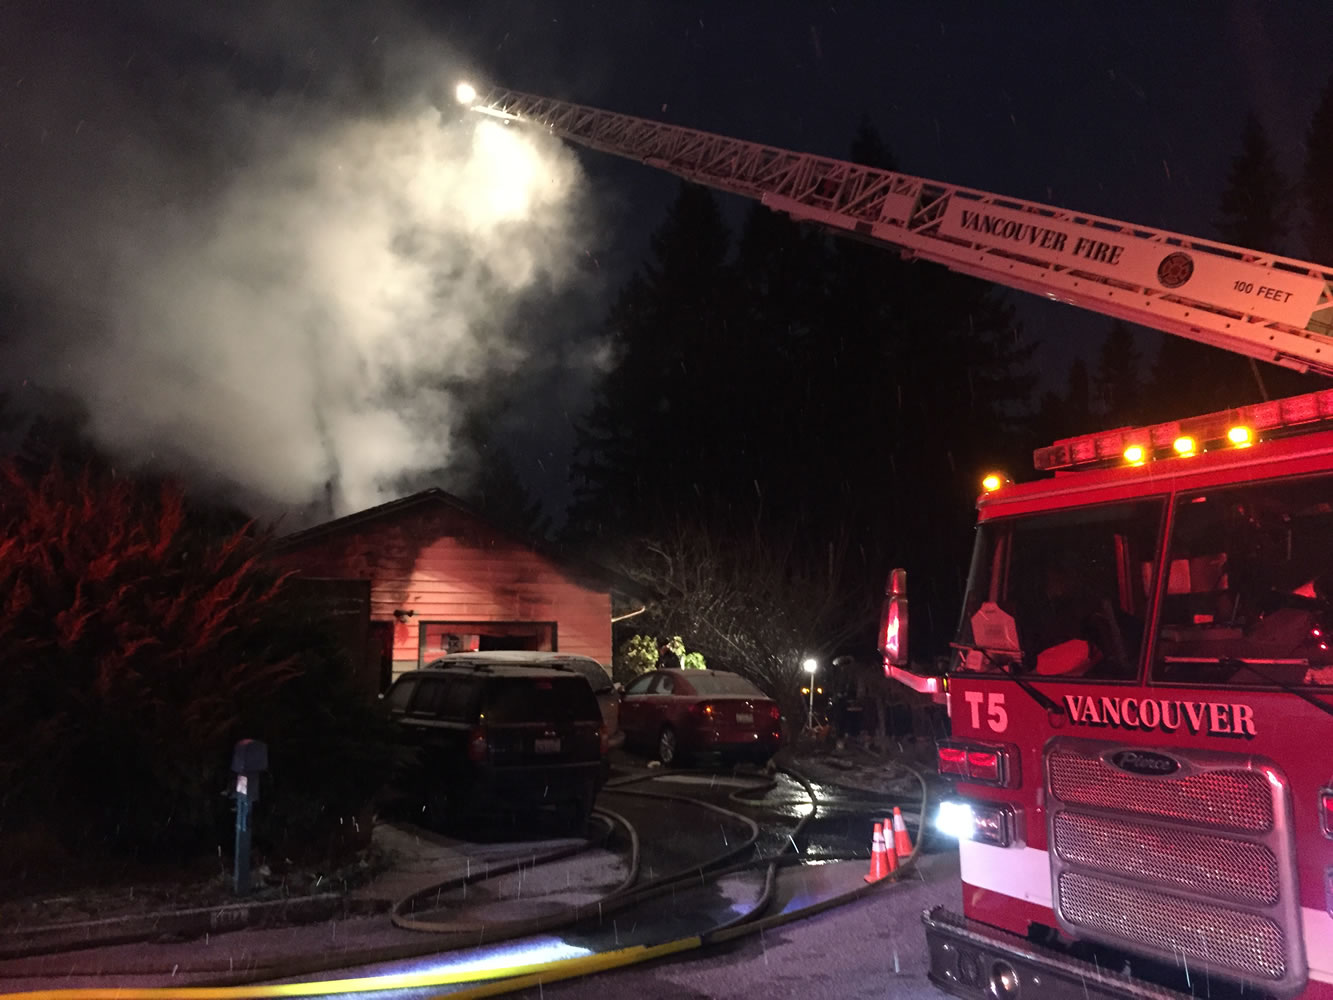 A woman was critically injured in a house fire early this morning. Firefighters rescued her from the home's garage, and she was taken to a hospital.